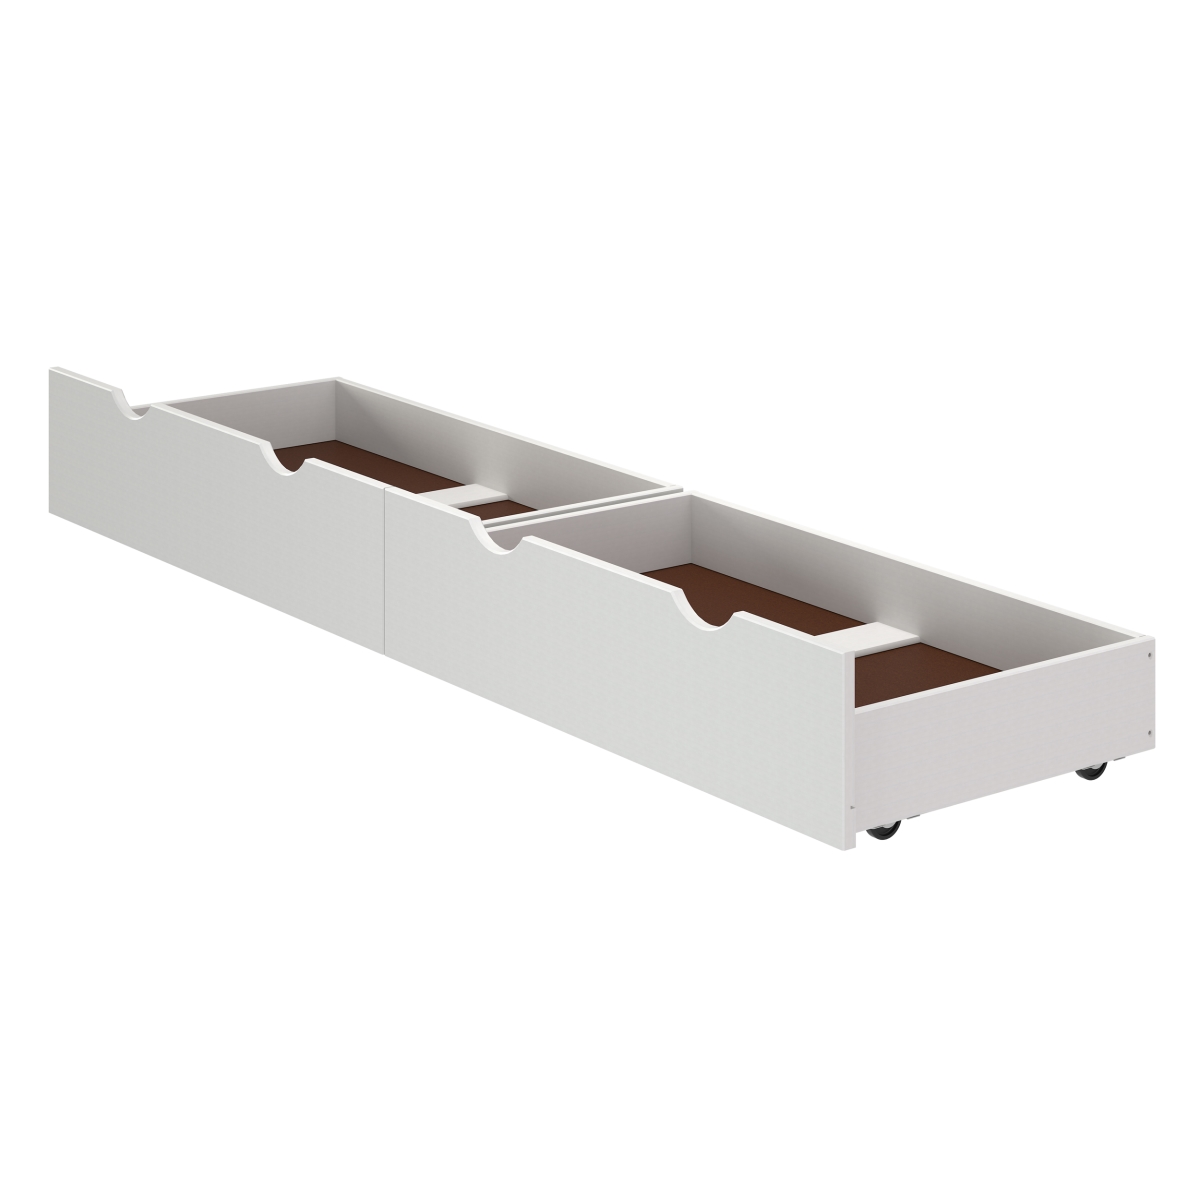 Picture of Alaterre AJ0049WH Underbed Storage Drawers, White - Set of 2